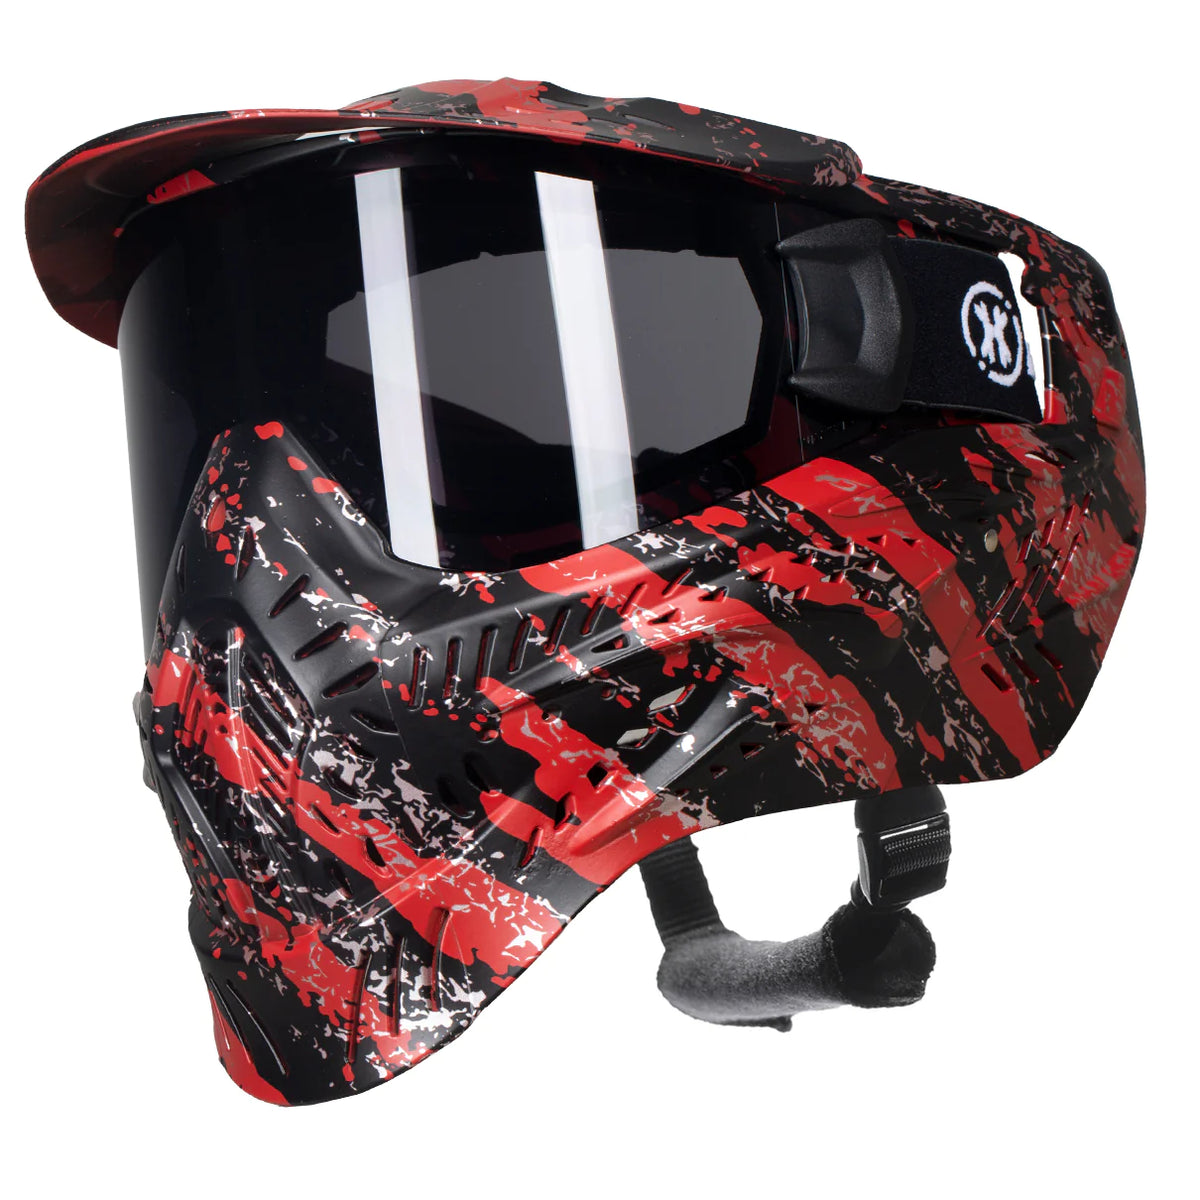 HSTL Goggle | Fracture Black/Red | Paintball & Airsoft Goggle